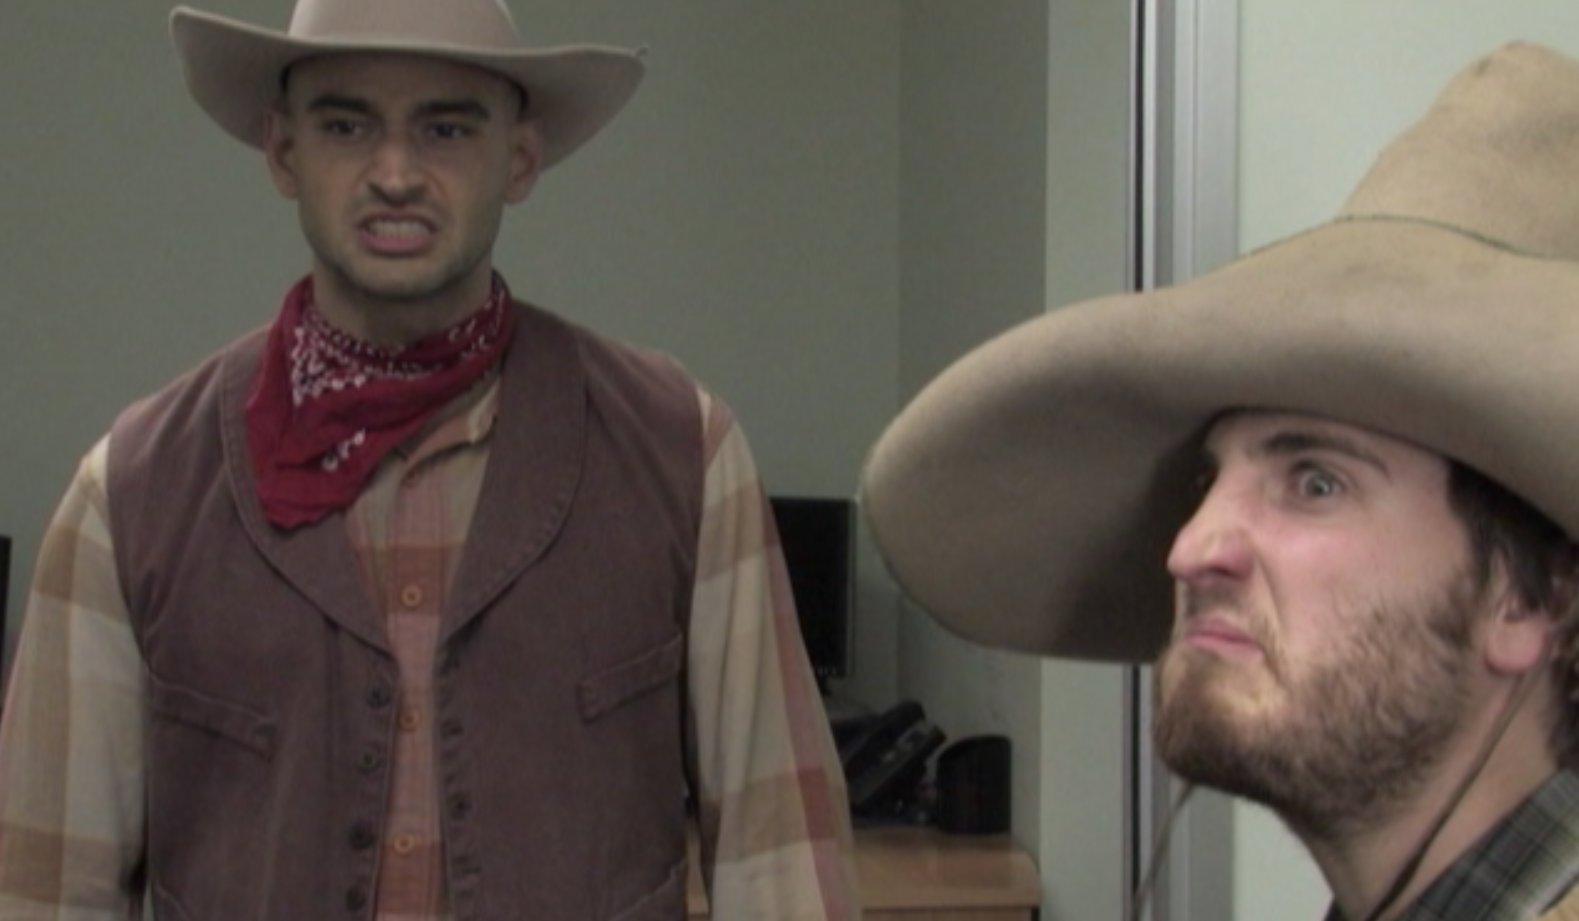 Two cowboys, Christian Monzon (left) & Jason Weissbrod (right), up to no good in 